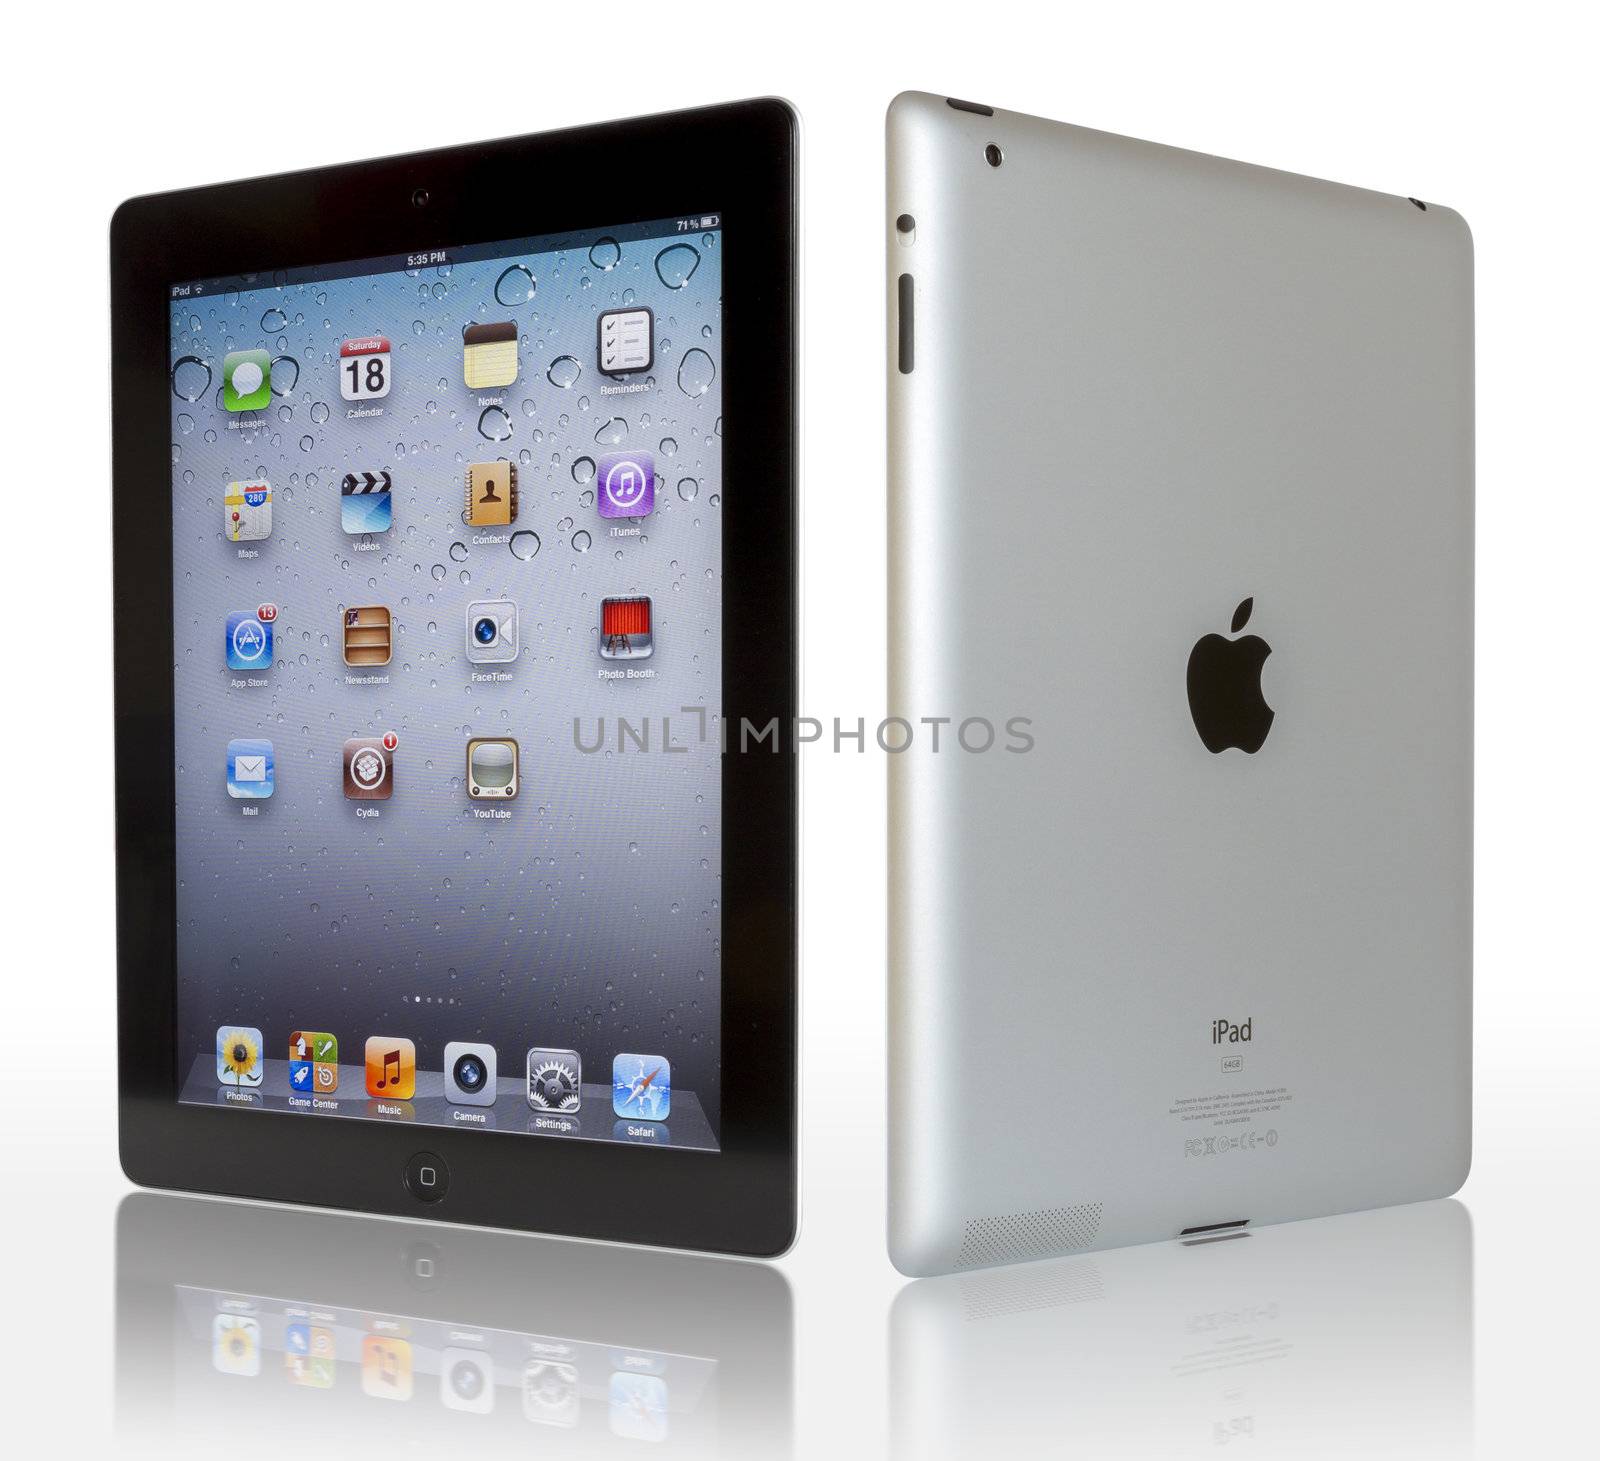 Galati, Romania- August 20, 2012: Wi-Fi + 4G iPad 3 with iOS 5.1 by Apple Inc, the third generation iPad was released for sale by Apple Inc on March 16, 2012. The New iPad 3 boasts a stunning retina display, a beefed up A5X dual-core processor, quad-core graphics. Studio shot on white background.